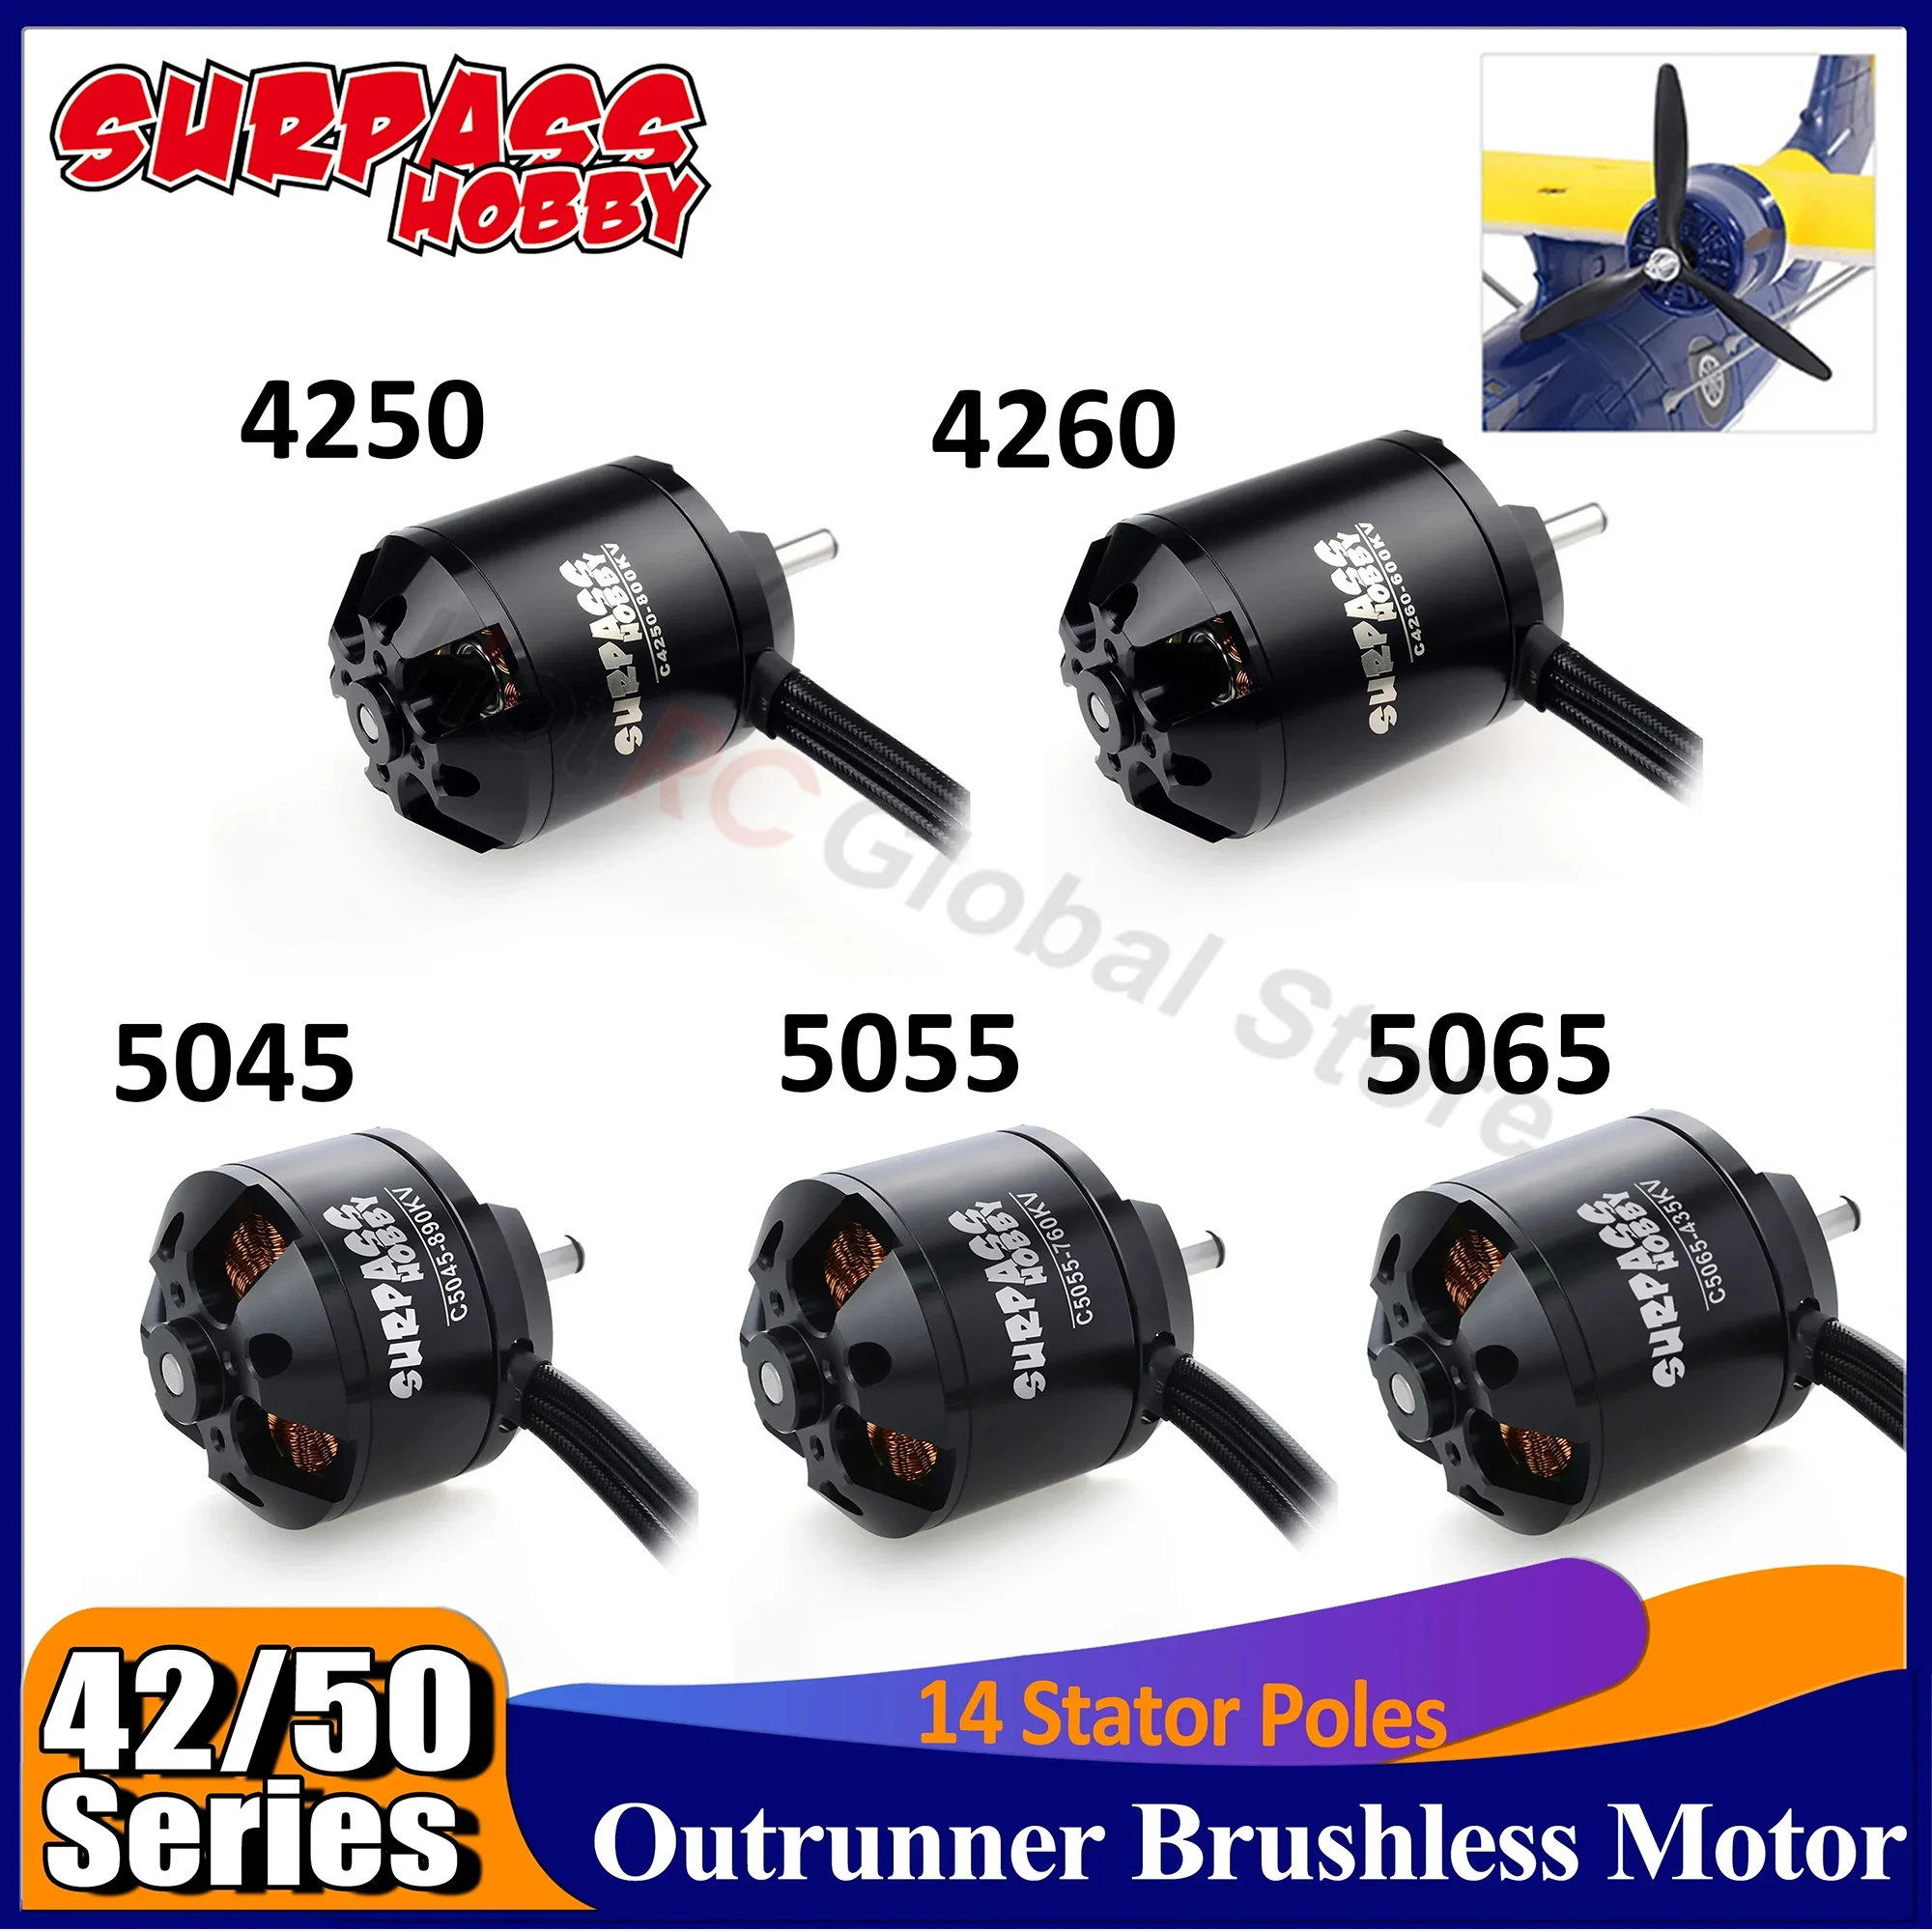 

Outrunner Brushless Motor Surpass Hobby C4250 C4260 C5045 C5055 C5065 14Poles for RC UAV Aircraft Multicopter Plane Helicopter